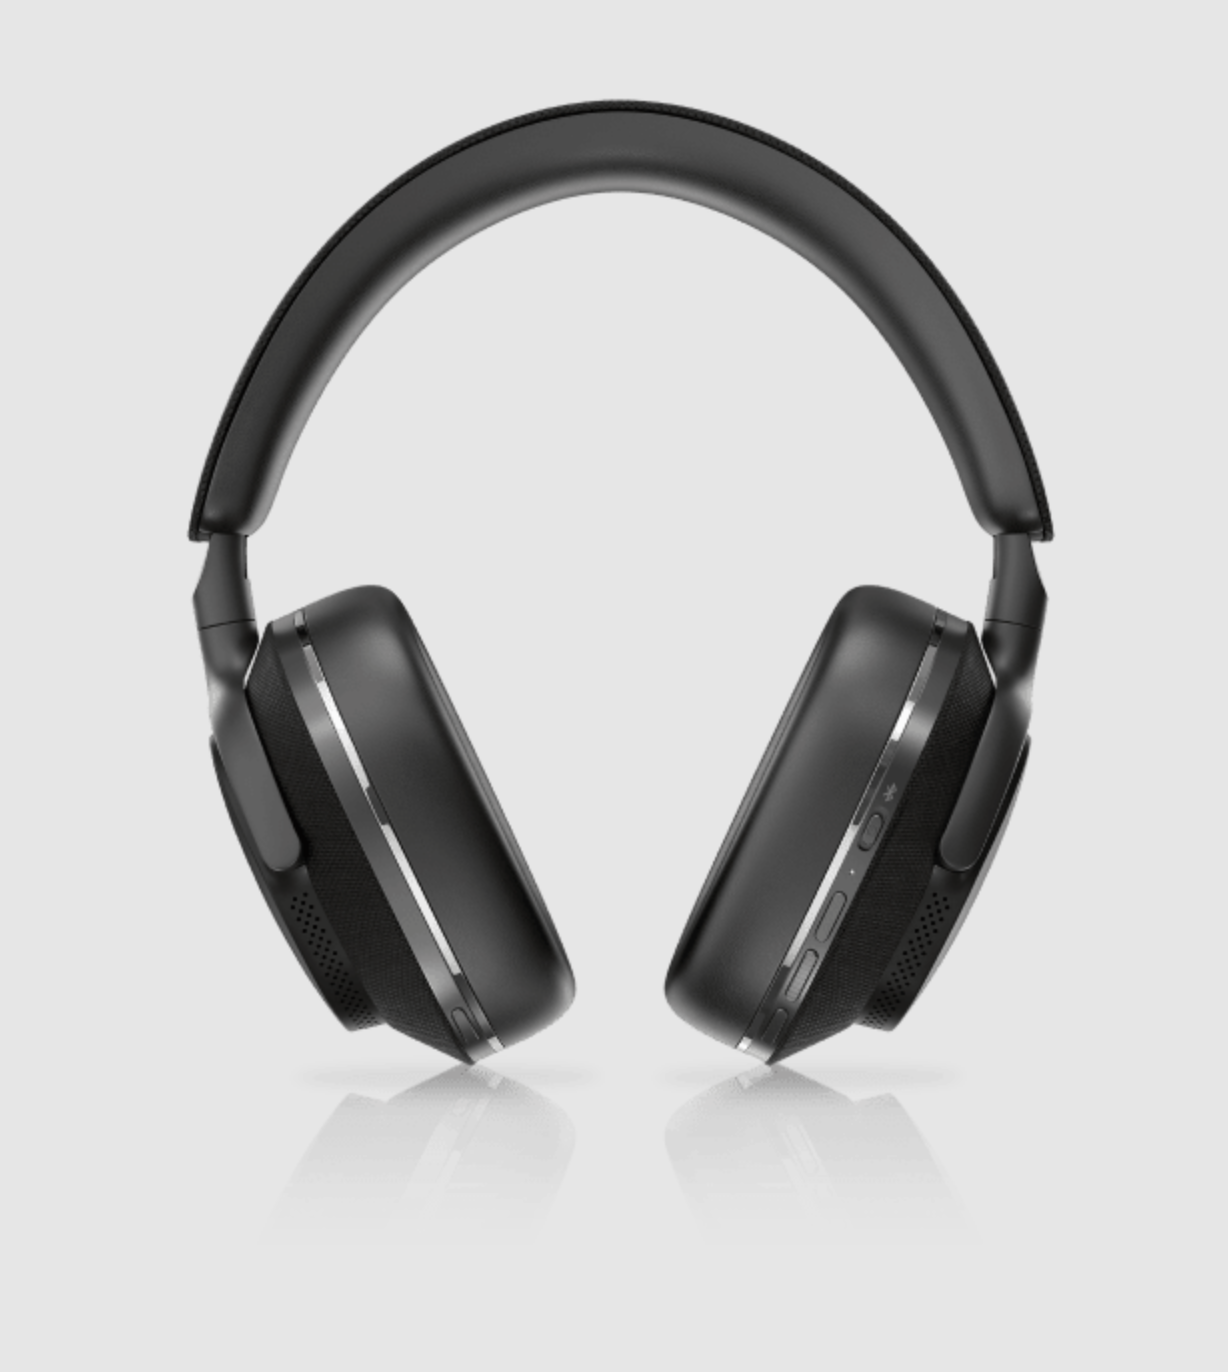 B&W Px7 S2 Noise Cancelling Headphones in Black.  Image shows controls